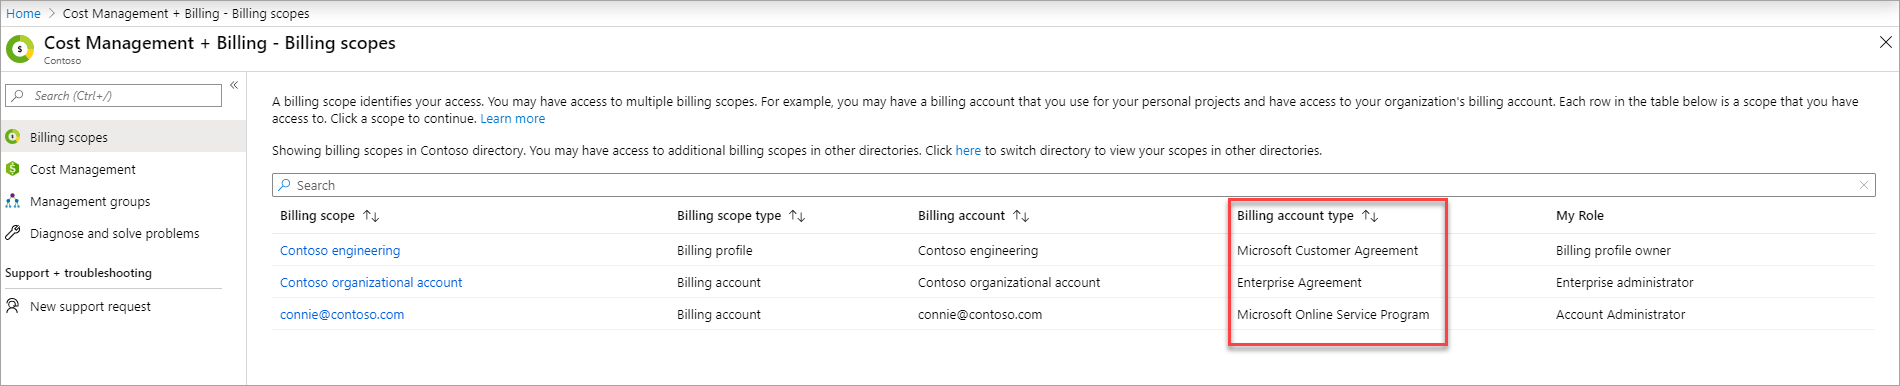 Screenshot that shows microsoft customer agreement in billing account list page